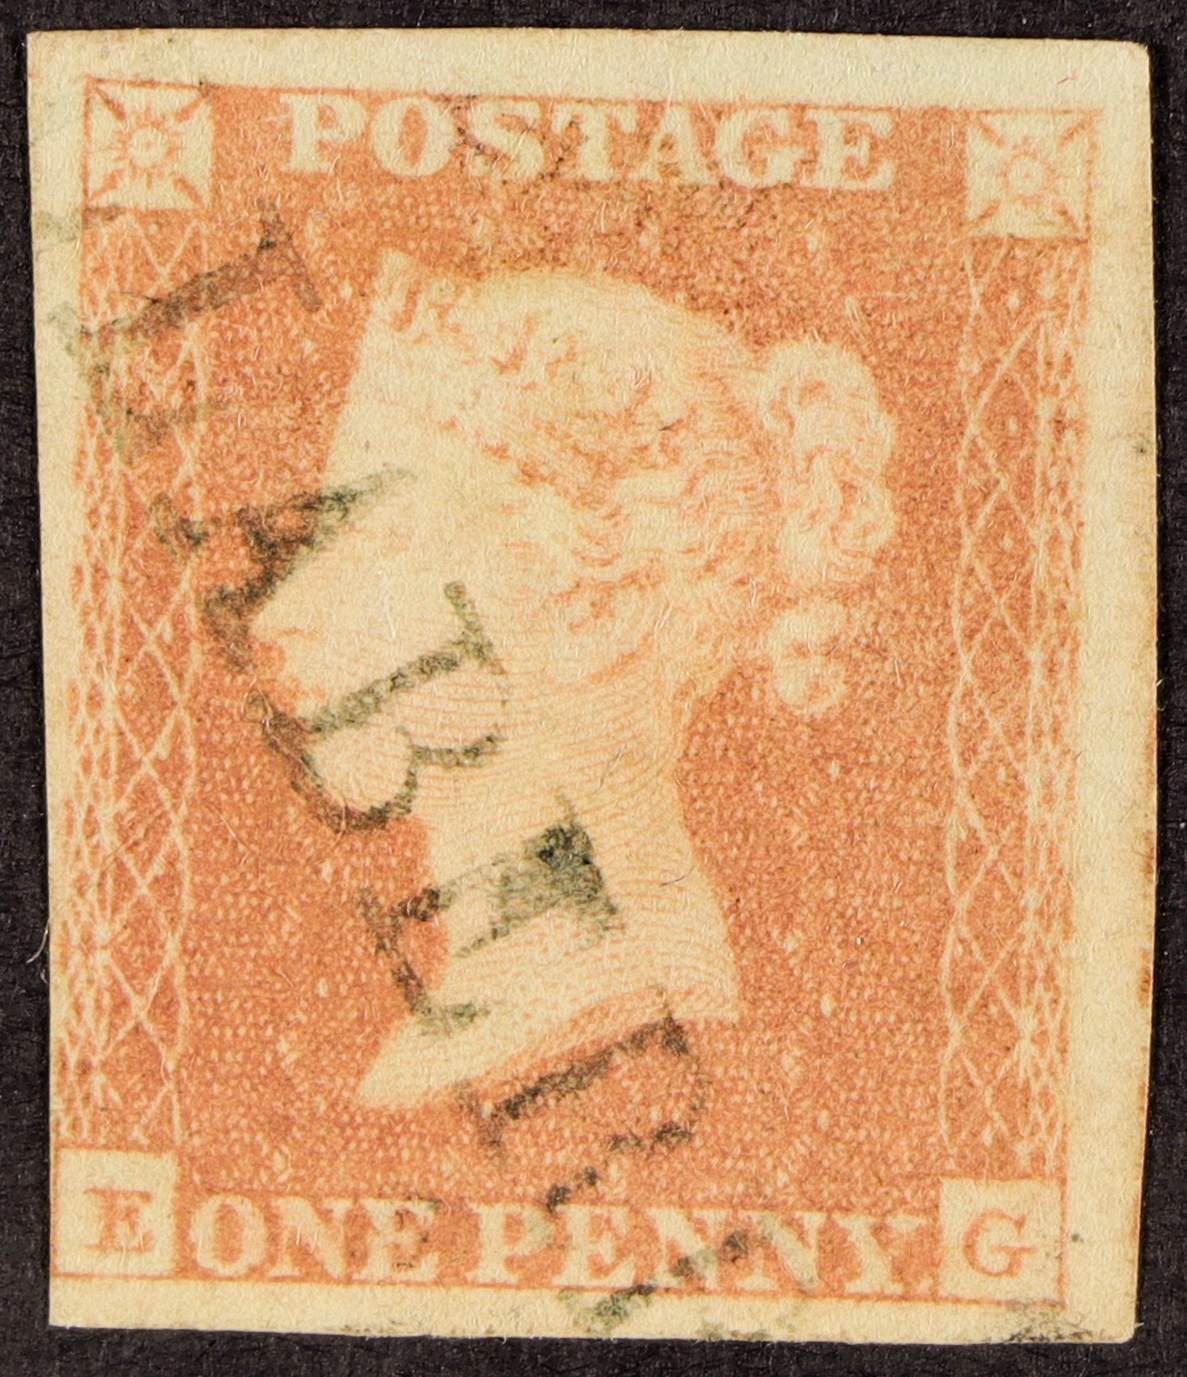 GB.QUEEN VICTORIA 1841 1d pale red-brown imperf used with straight line "OLLABERRY" (Shetland